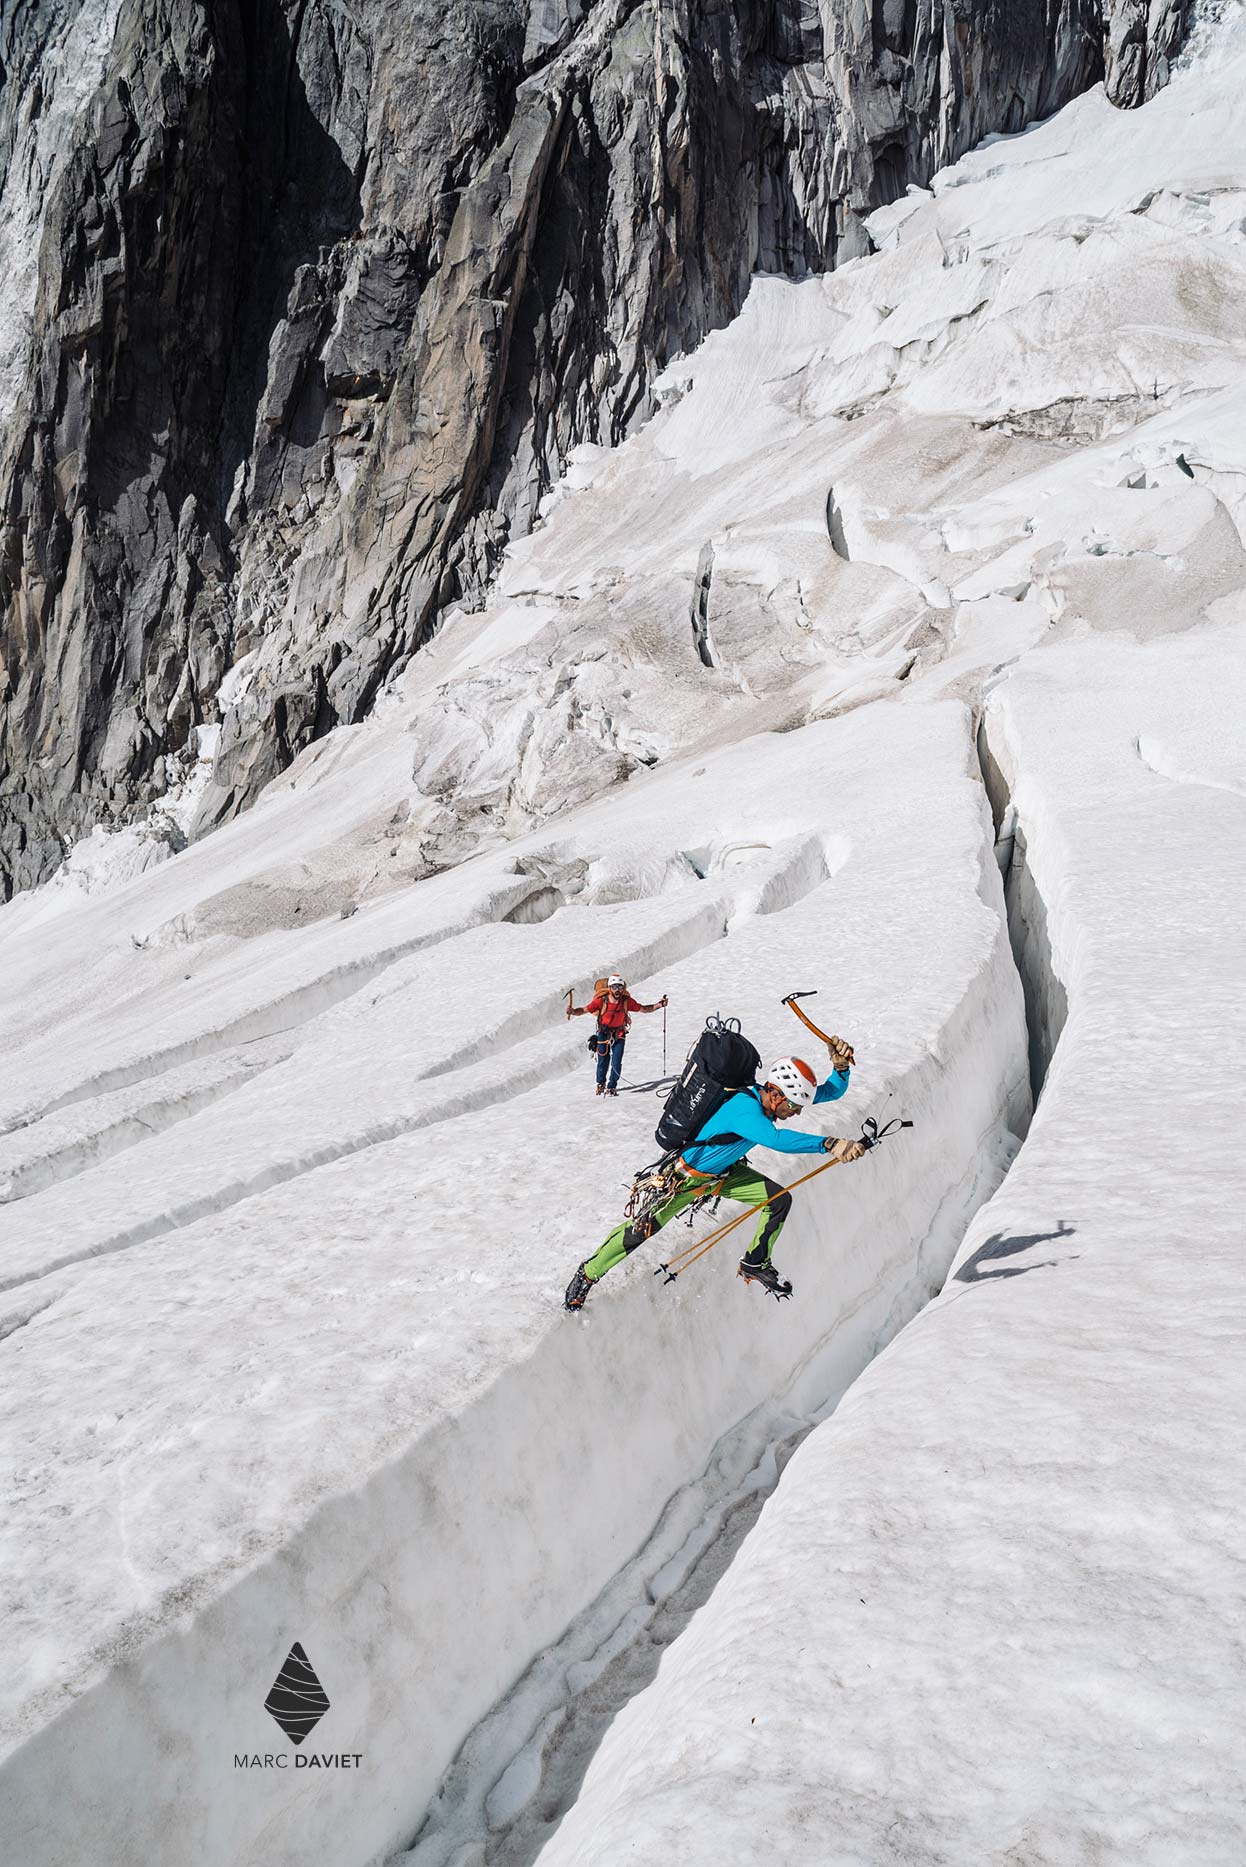 Jumping above a crevasse